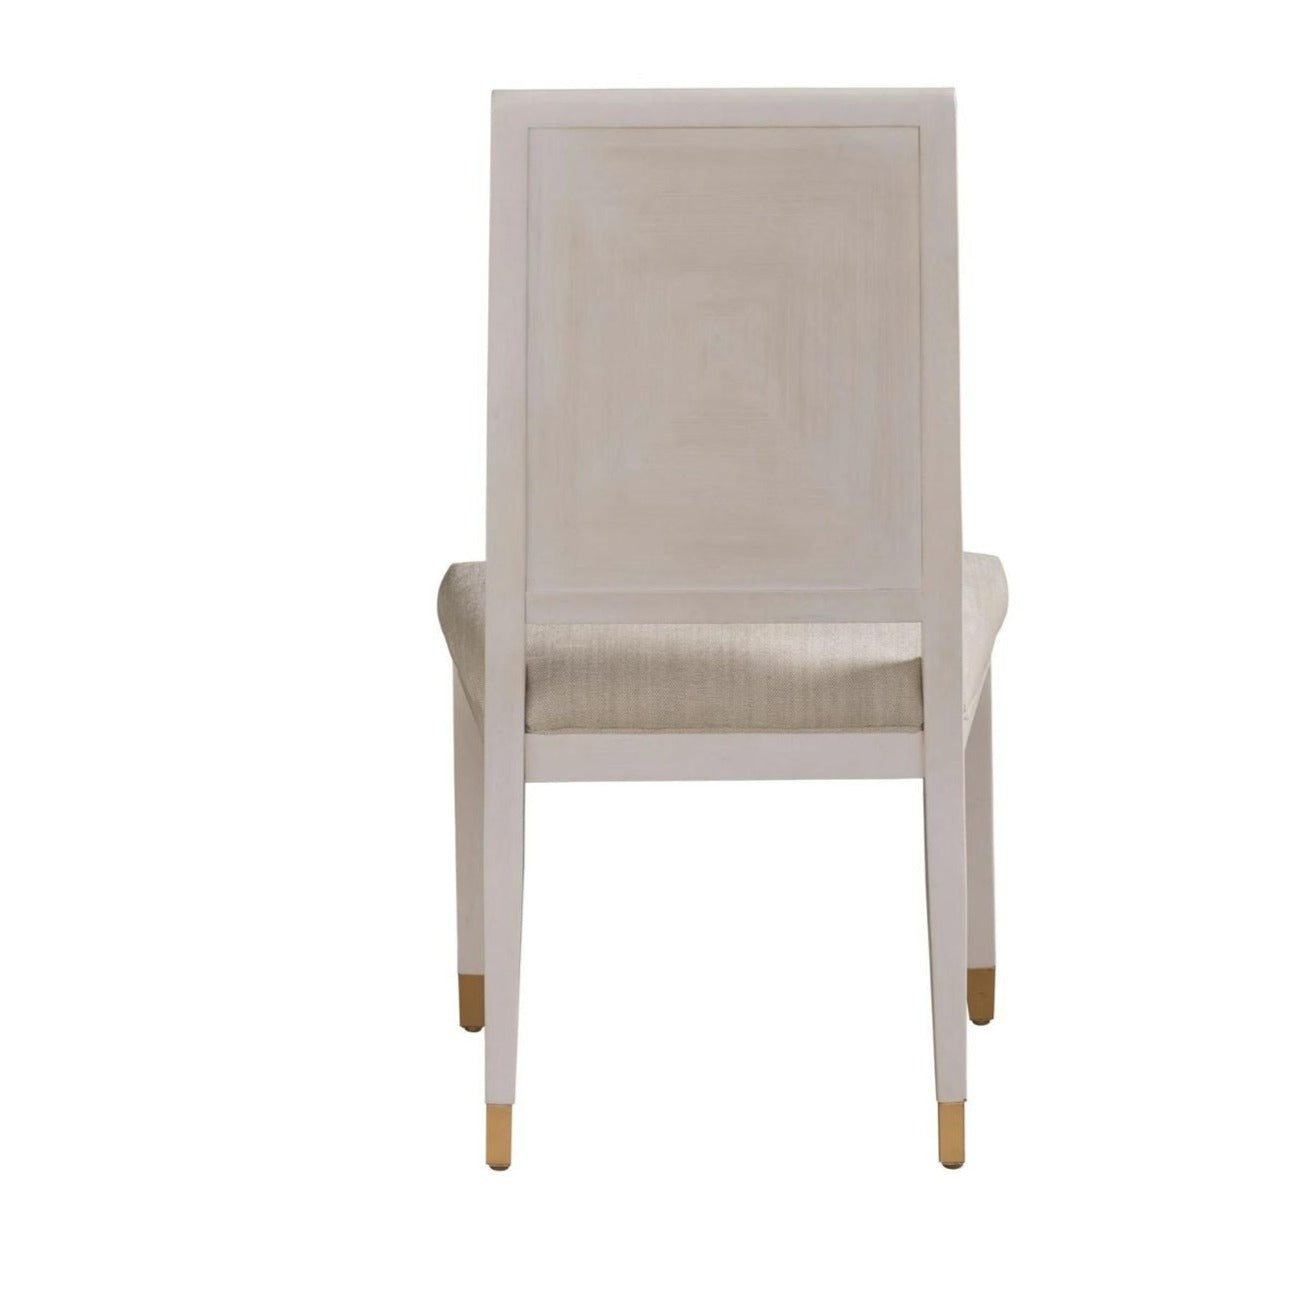 Framed dining chairs